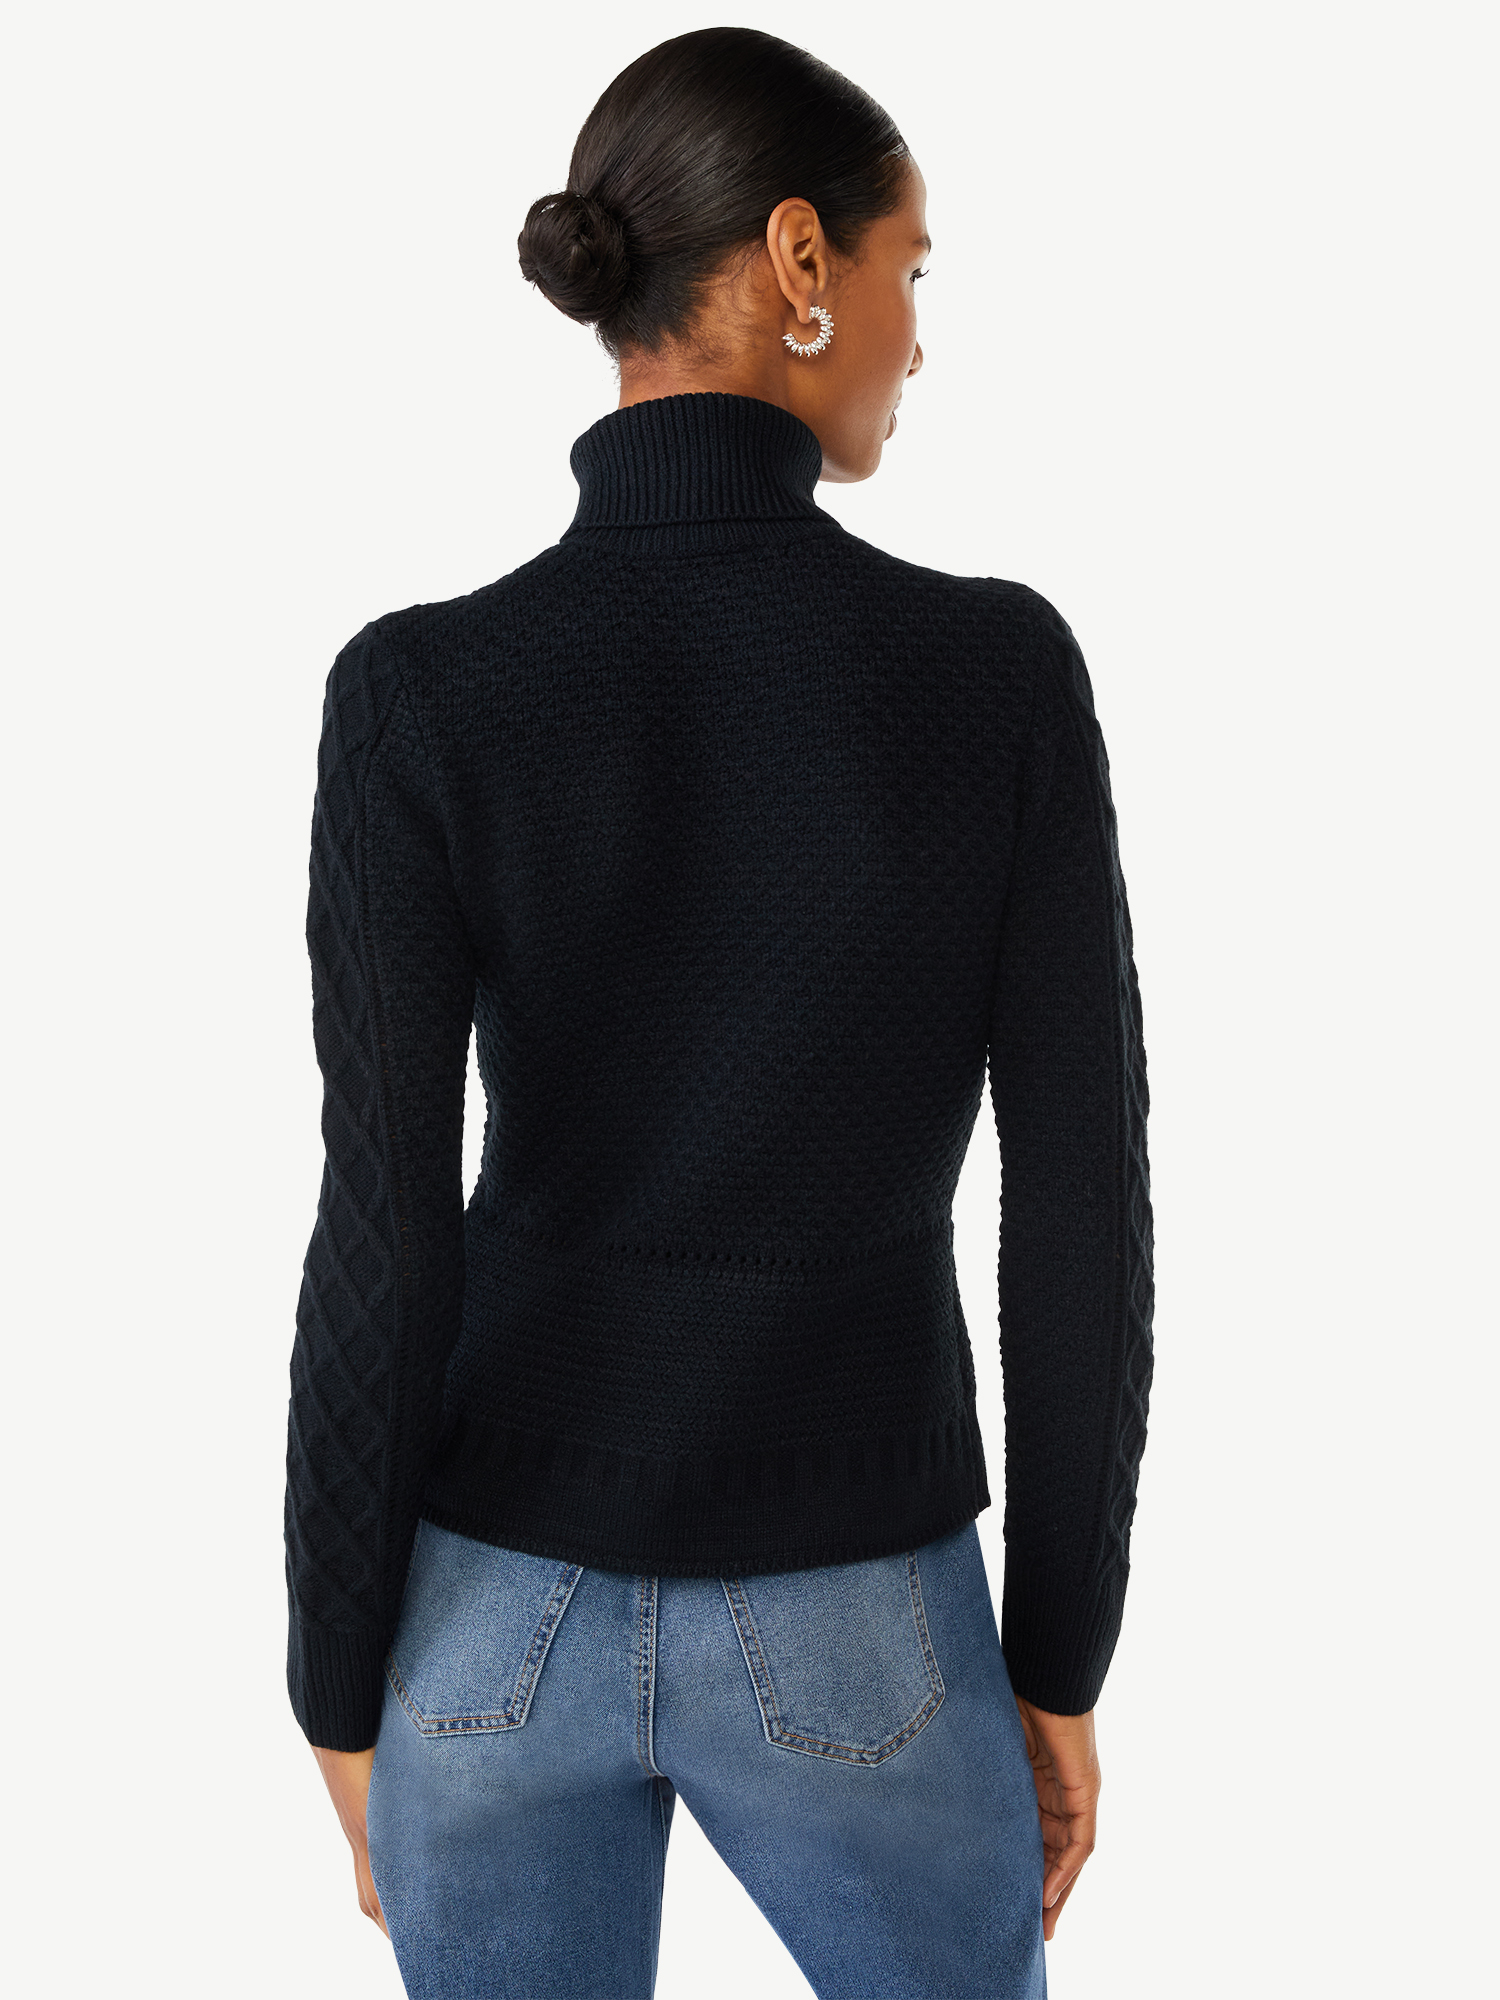 Scoop Women's Cable Knit Pullover Sweater with Long Sleeves, Sizes XS-XXL - image 4 of 5